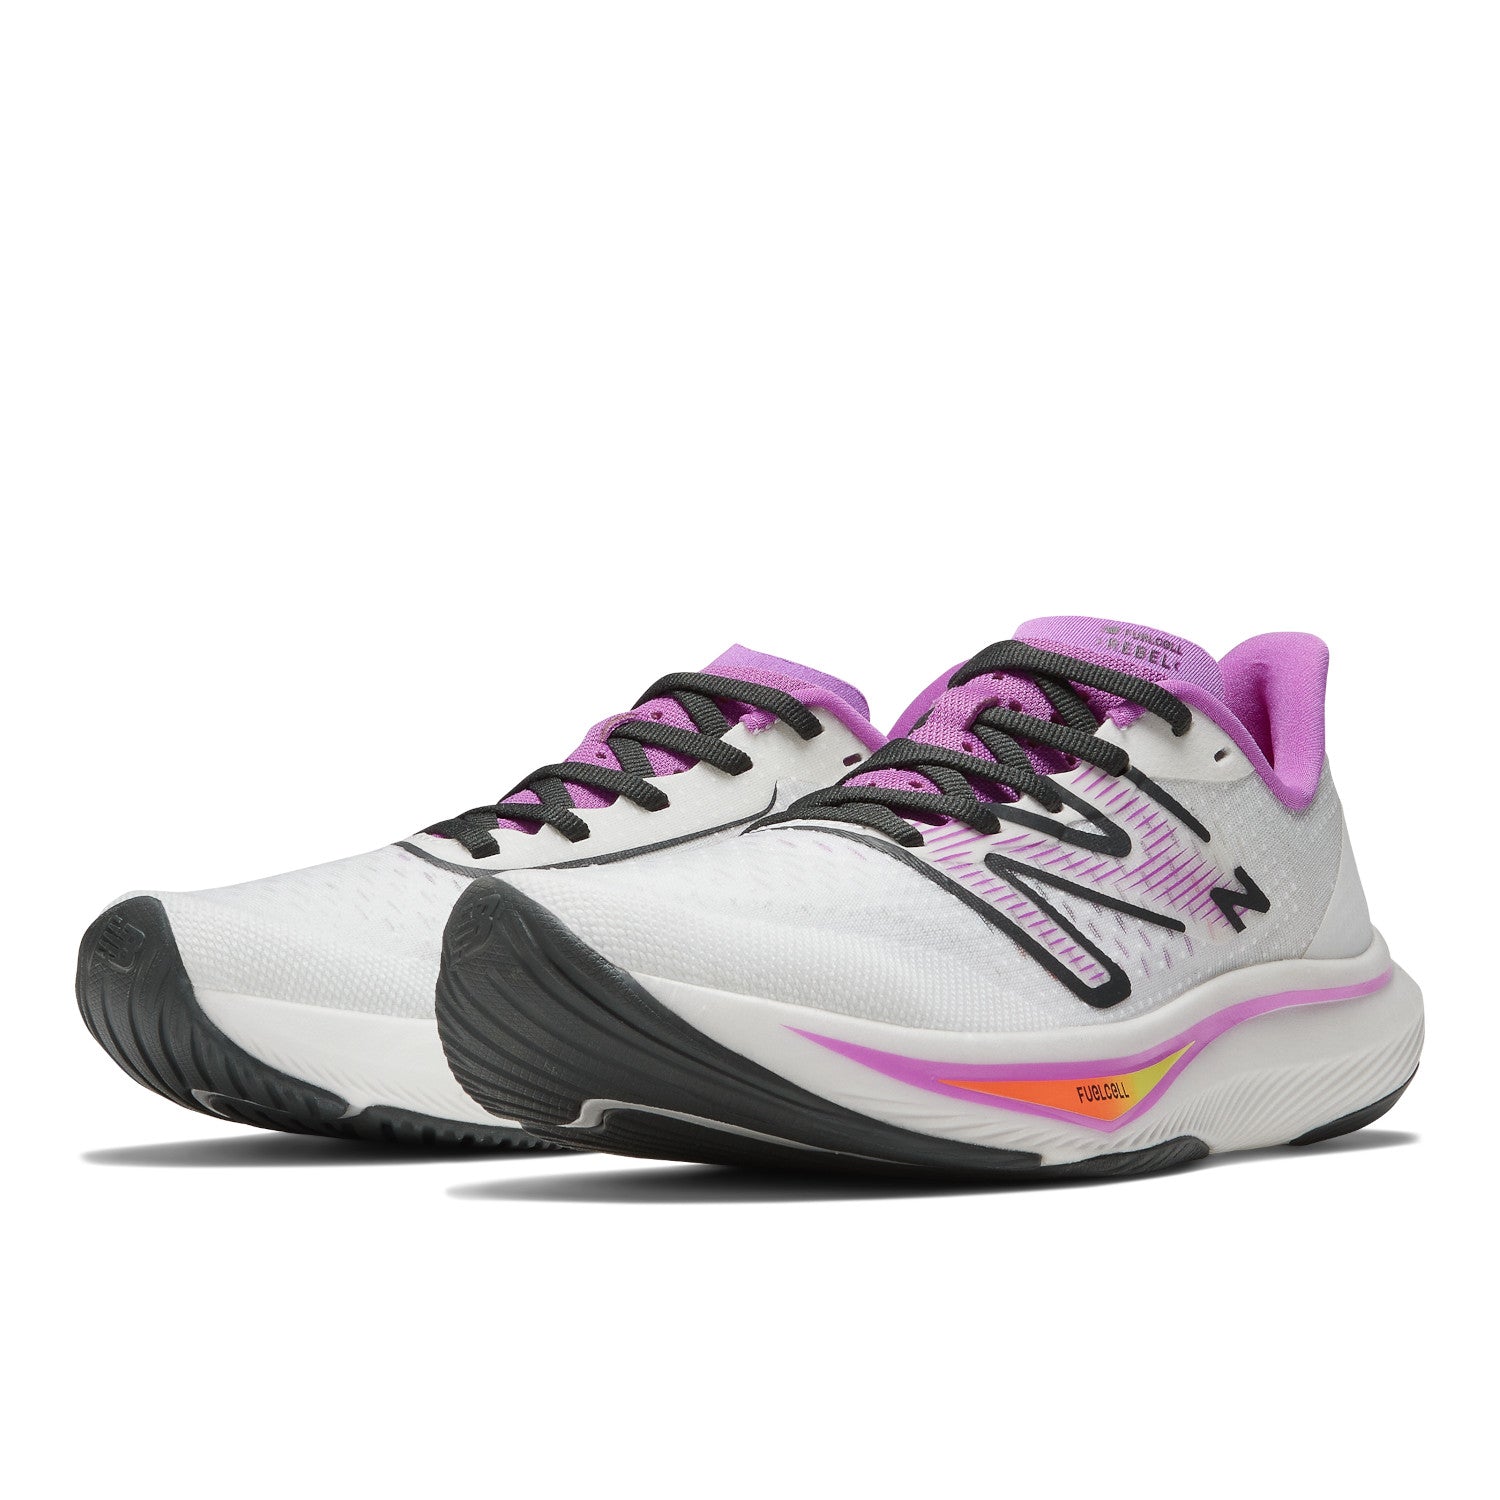 New Balance FuelCell Rebel v3 WFCXCW3 Women's10